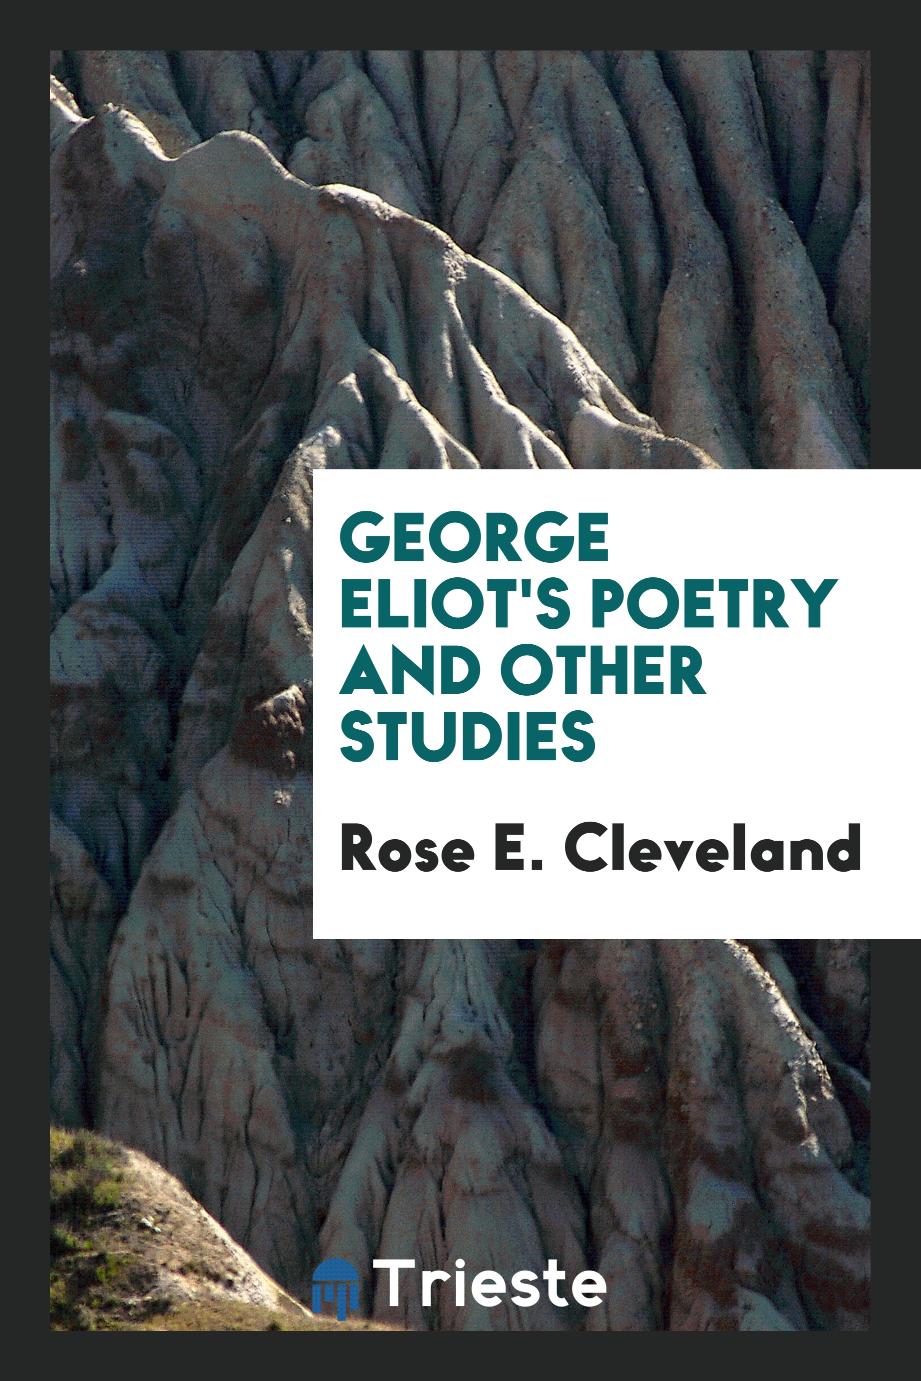 George Eliot's poetry and other studies